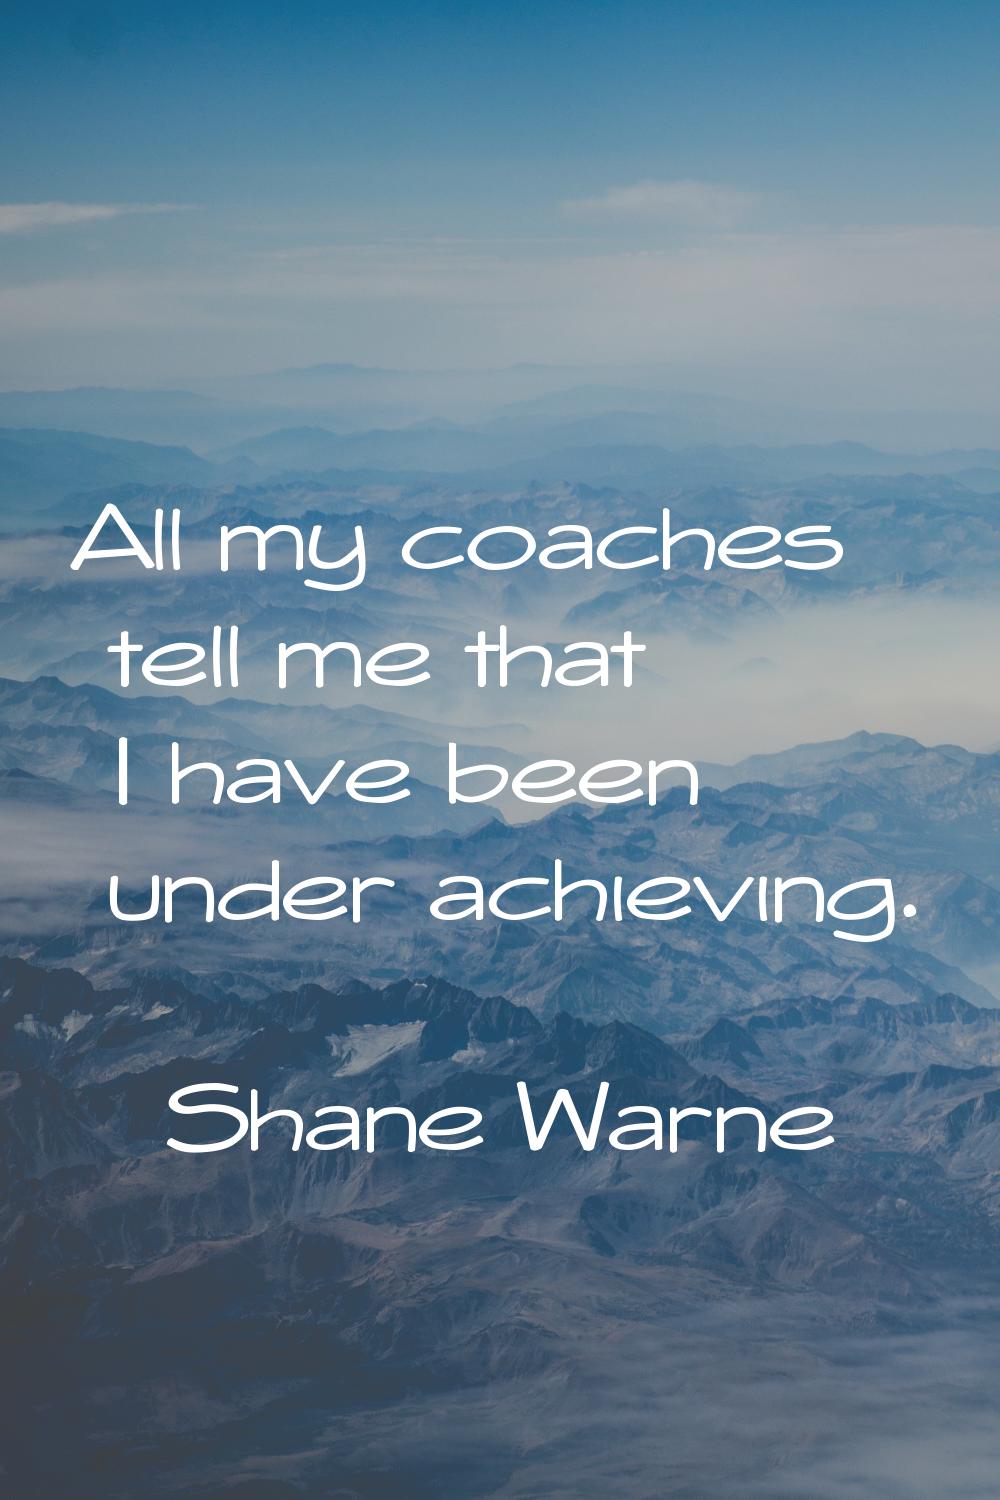 All my coaches tell me that I have been under achieving.